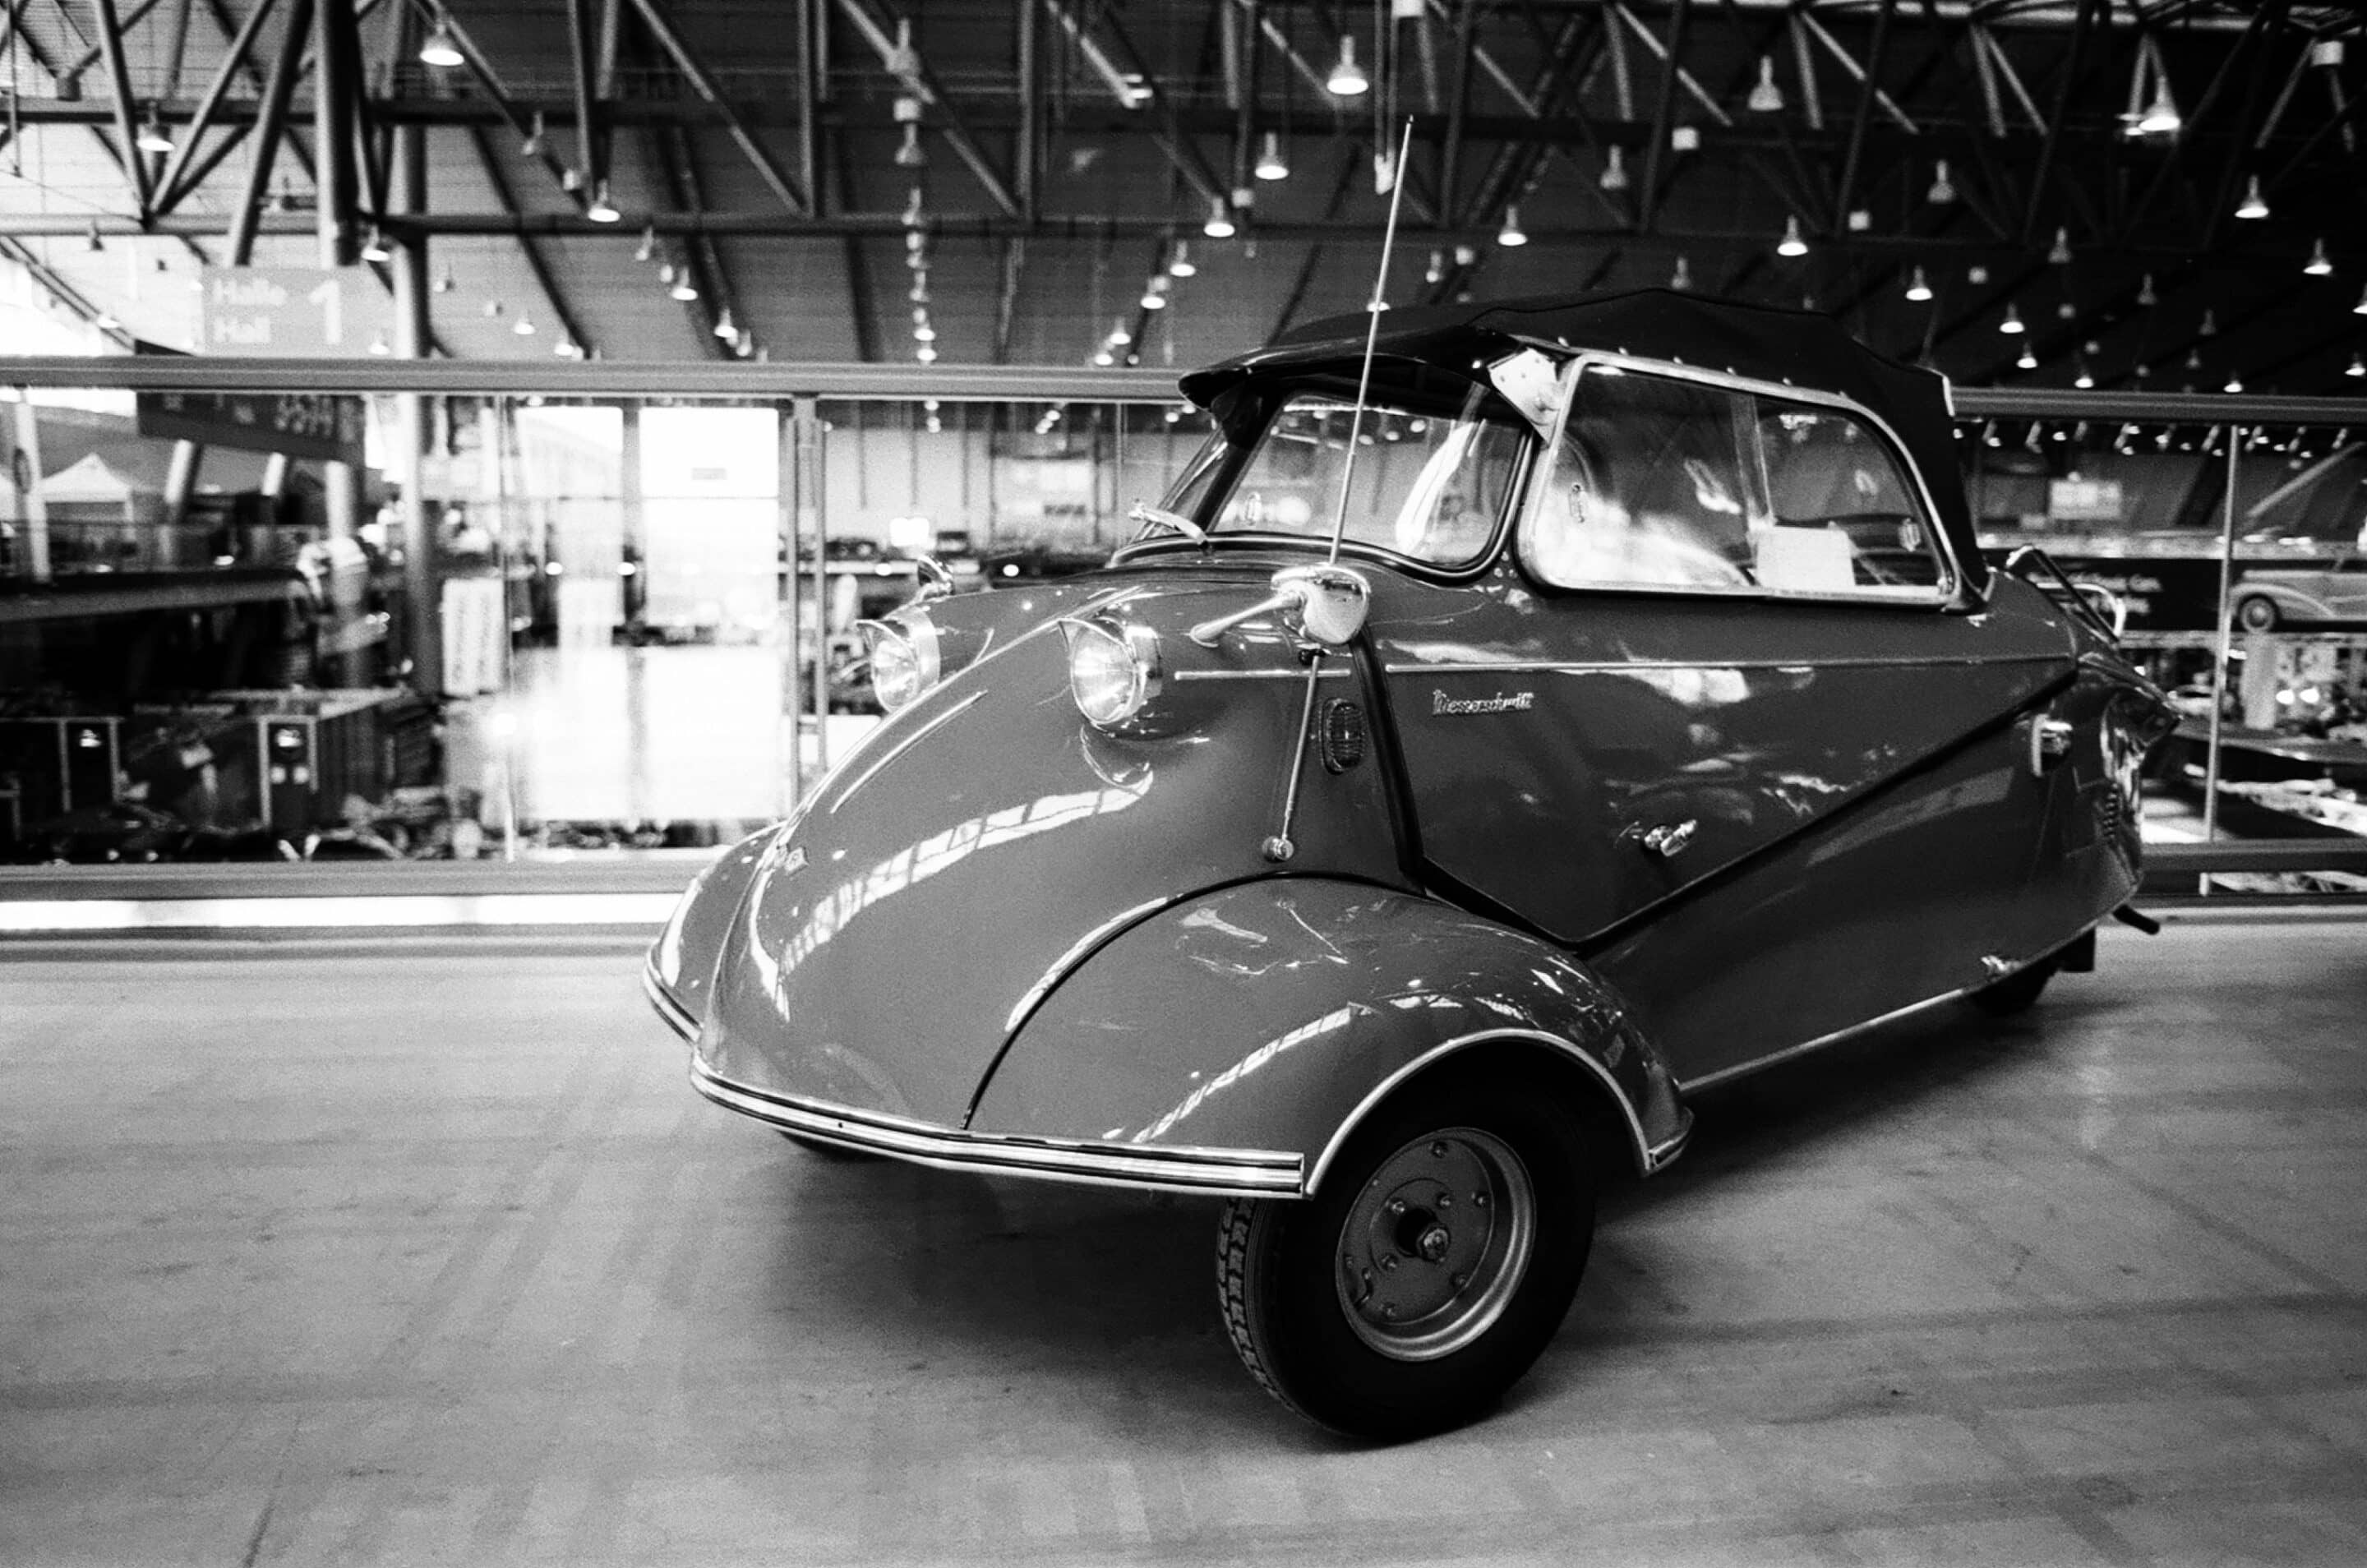 The bizarre 'bubble' microcar that Elvis owned